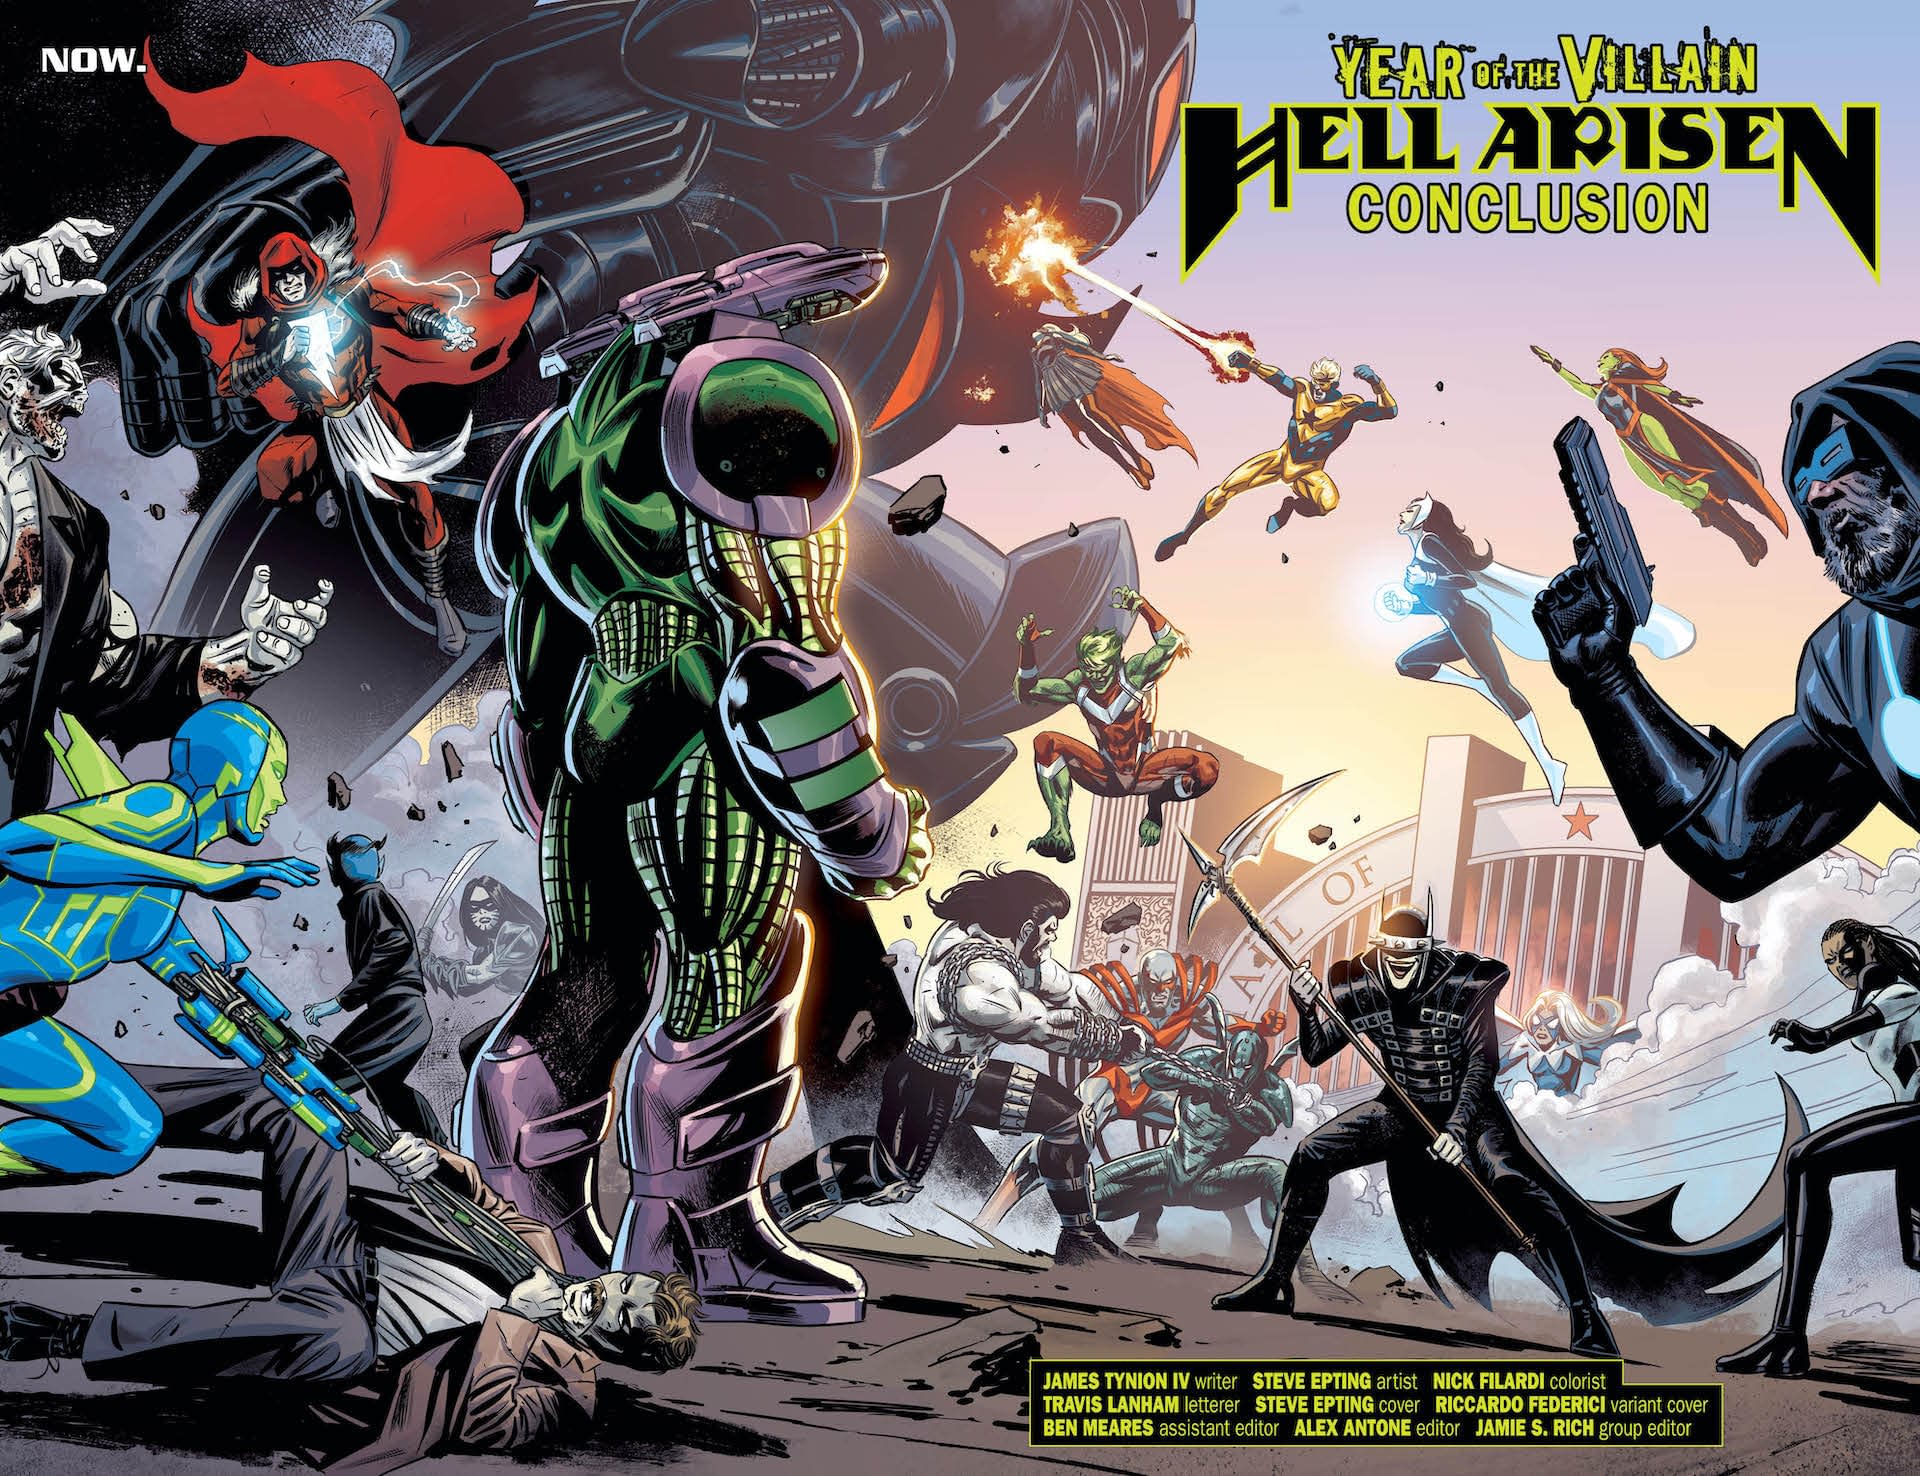 Lex Luthor Explains His Mid-Life Crisis in Year of the Villain: Hell Arisen #4 [Preview]